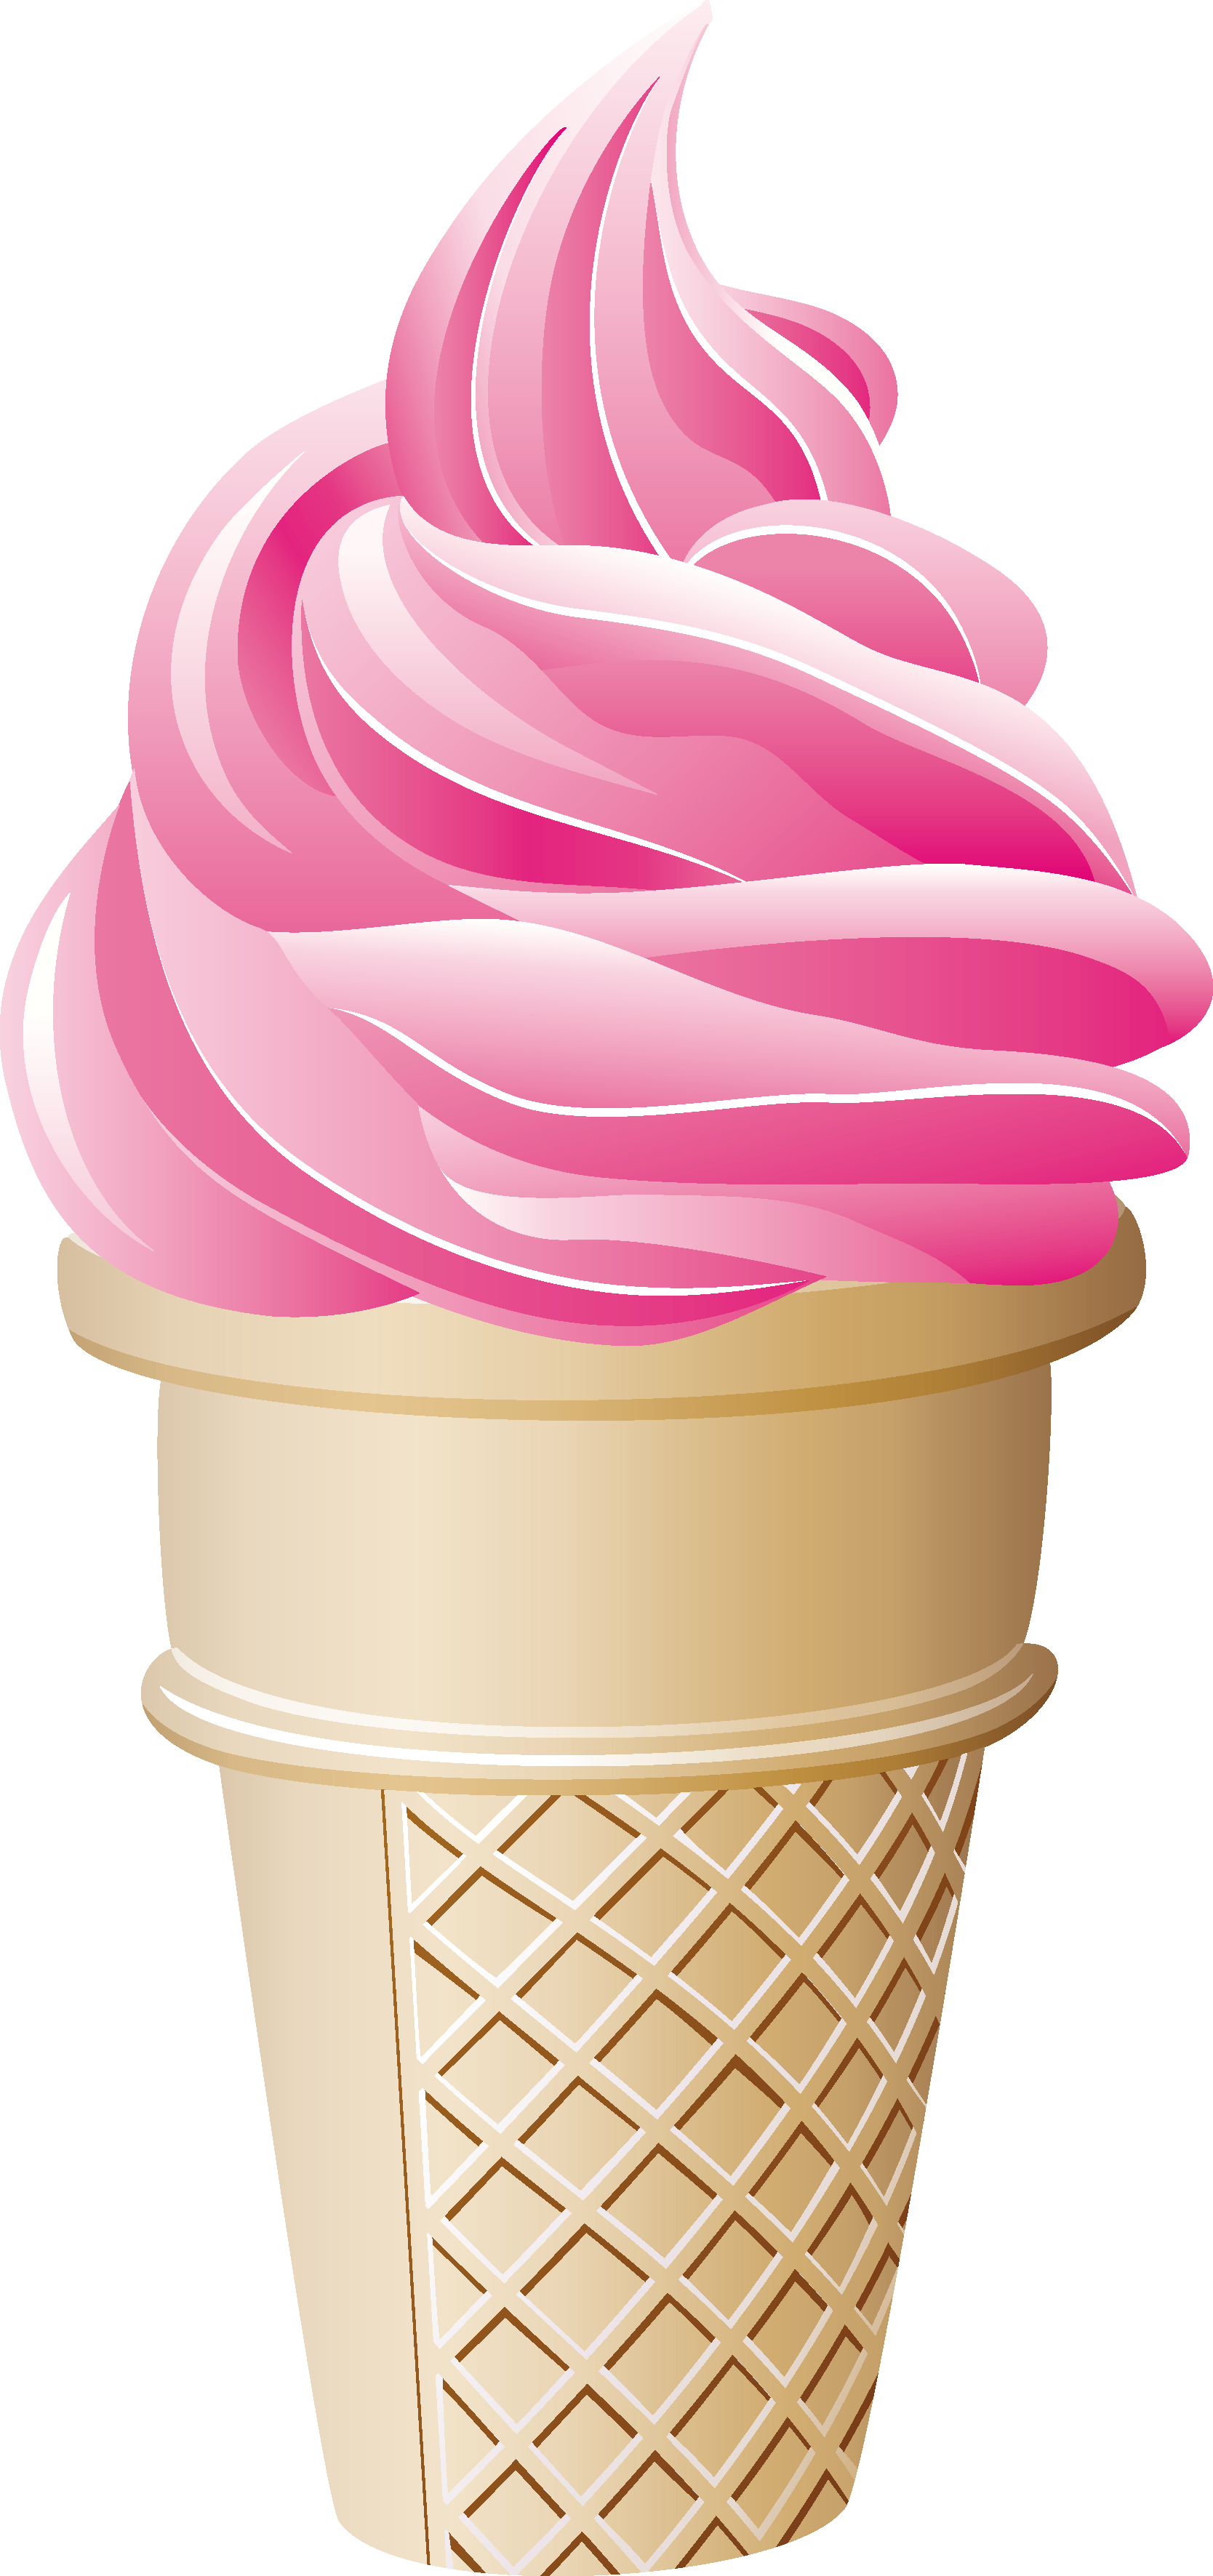 Ice cream PNG image transparent image download, size: 1668x3543px